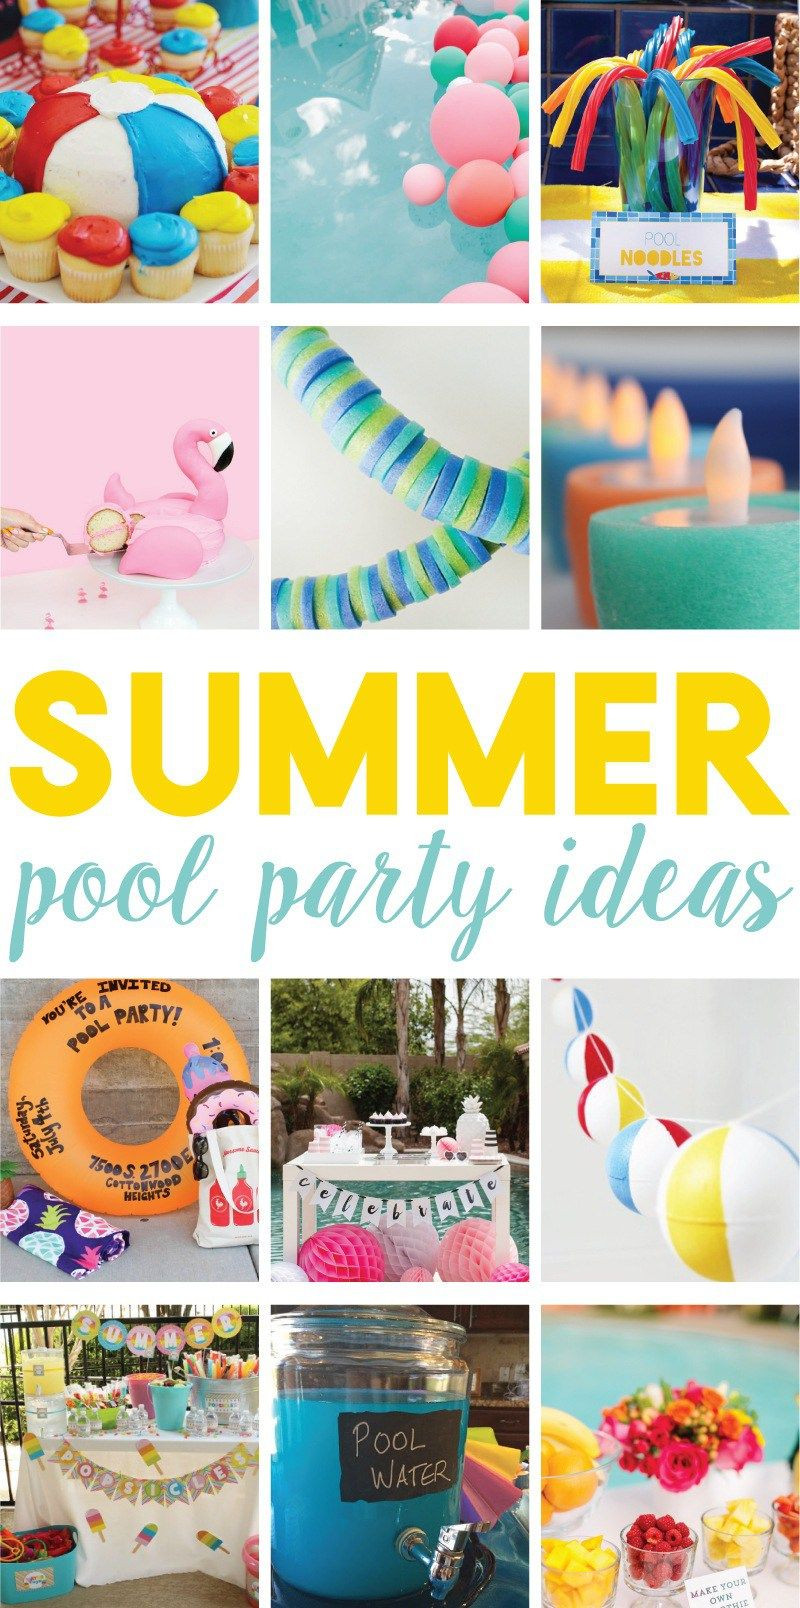 Pool Party Ideas Pinterest
 12 Easy Summer Pool Party Ideas on Love the Day